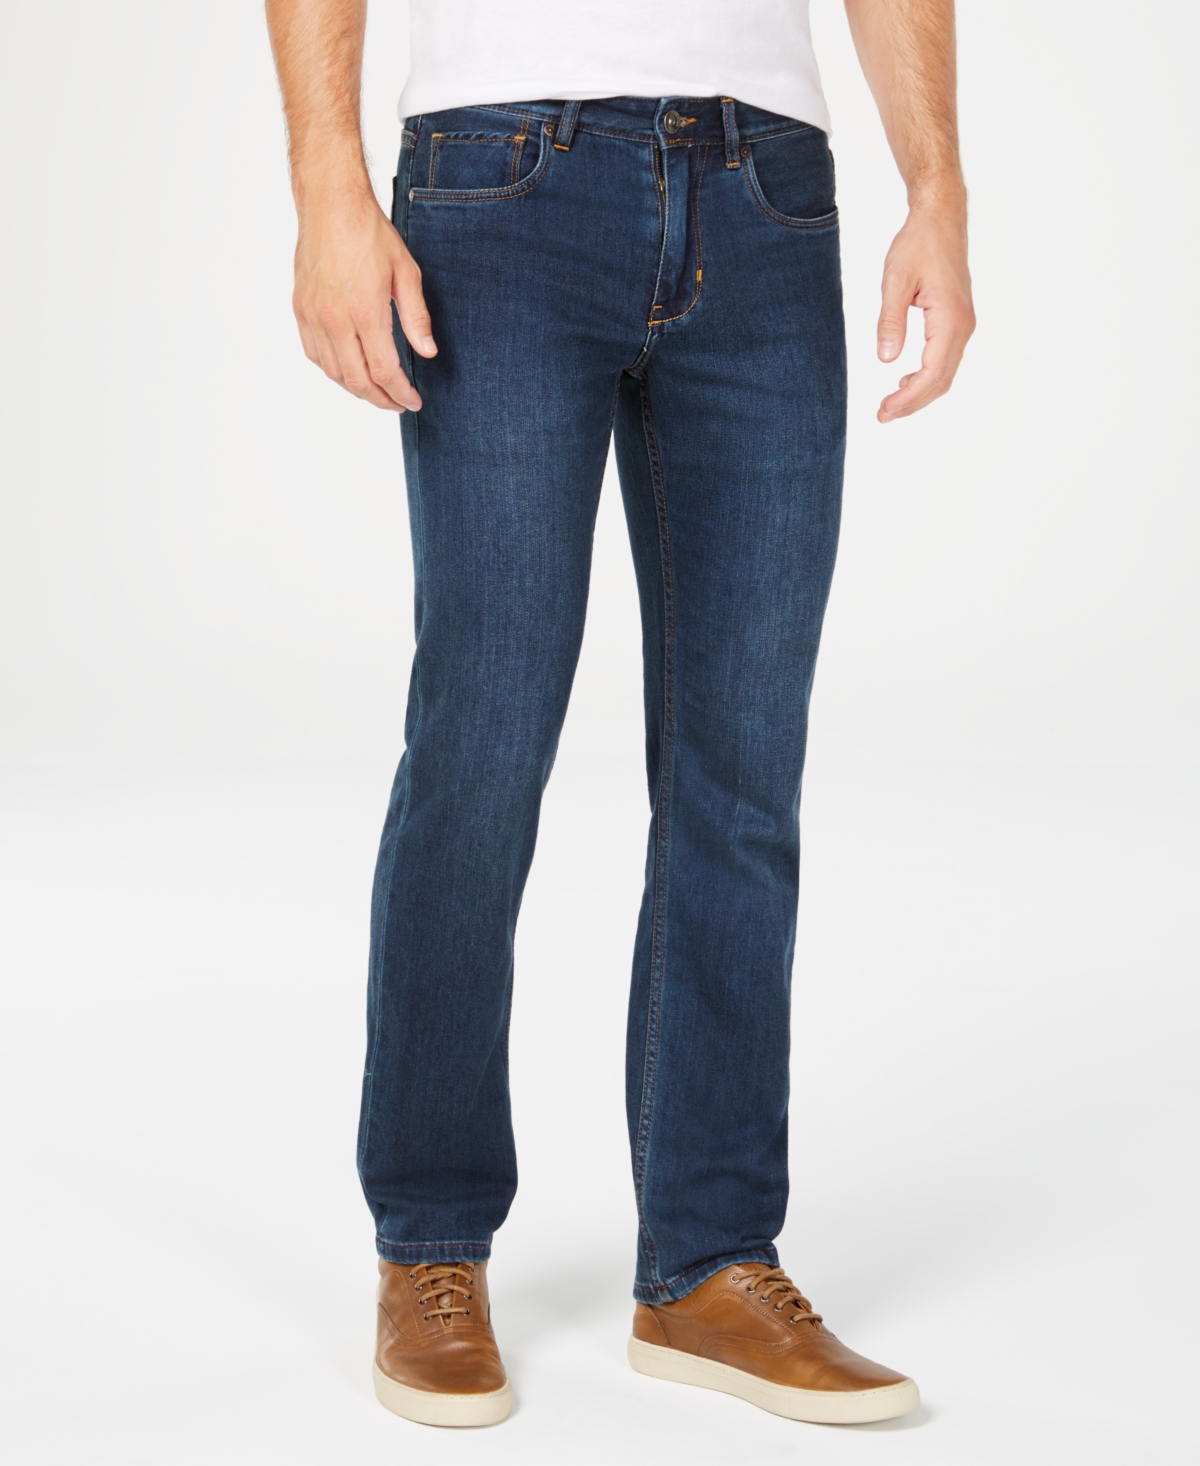 UPC 719260342507 product image for Tommy Bahama Men's Antigua Cove Authentic Fit Jeans | upcitemdb.com